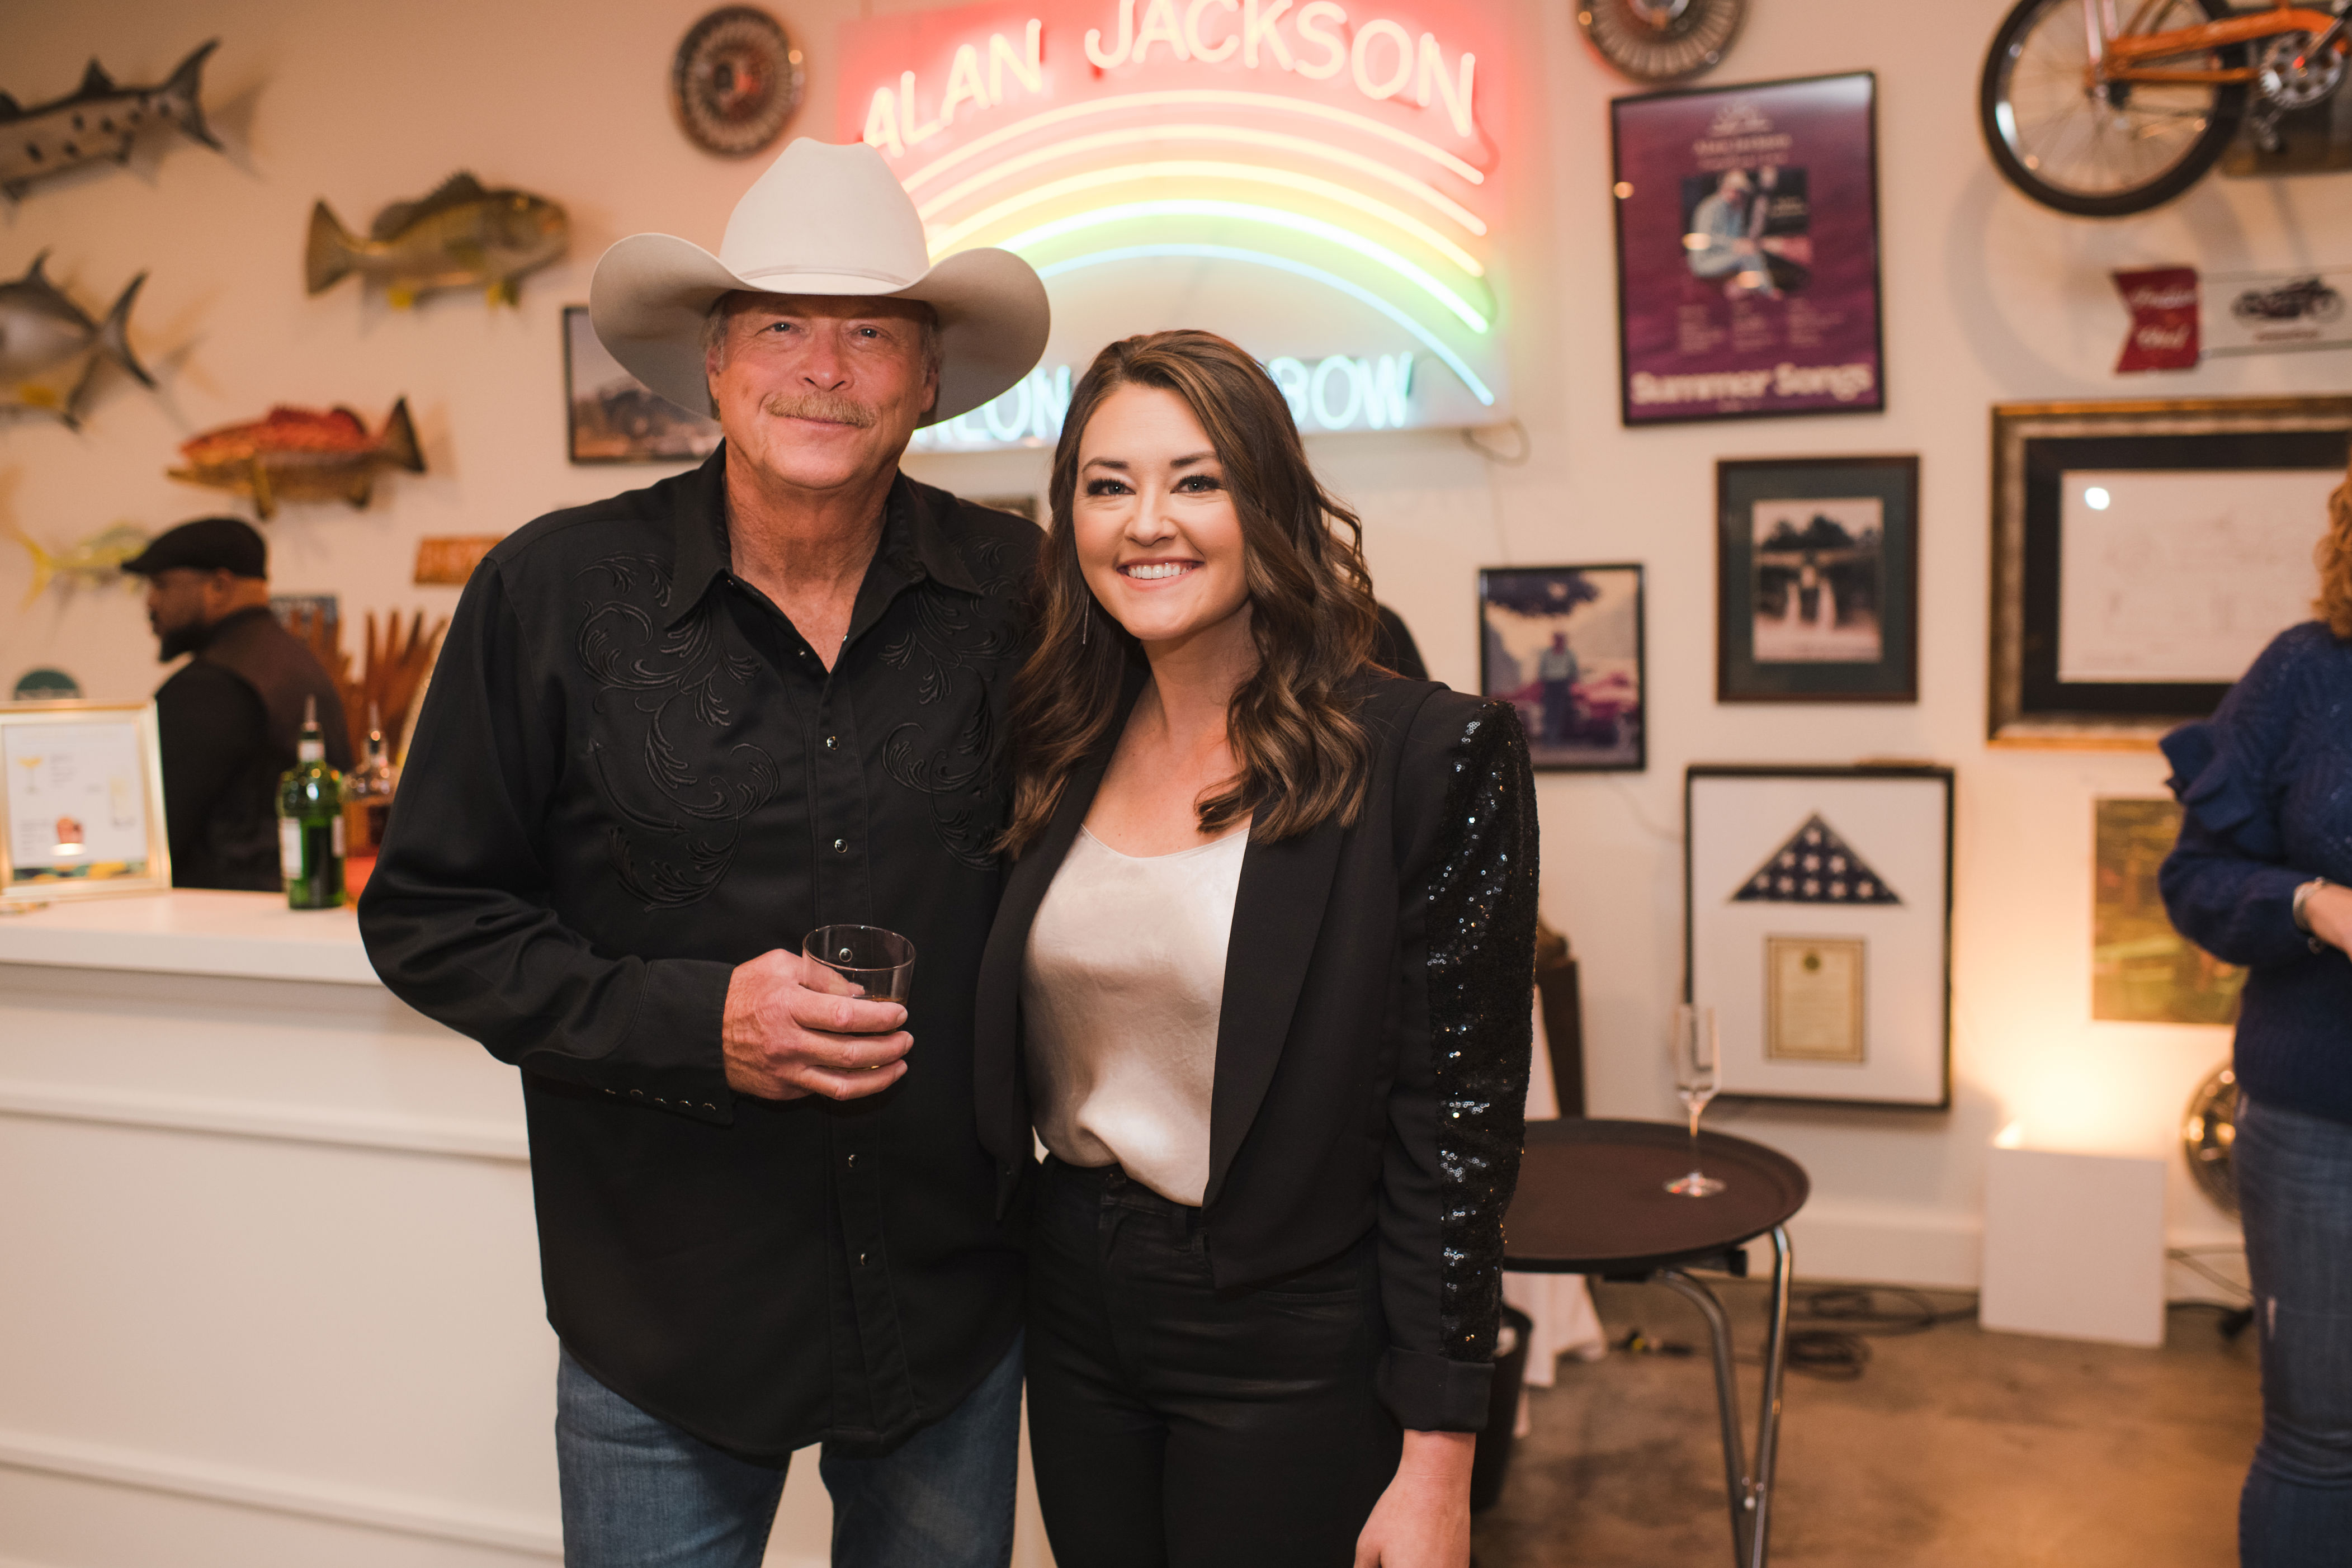 <p>Alan Jackson is seen here with his eldest daughter, Mattie Jackson Selecman (who was born in 1990), during a gathering at his home to celebrate the Nov. 16, 2021, release of <a href="https://www.thomasnelson.com/p/lemons-on-friday/">her new book, "Lemons on Friday: Trusting God Through My Greatest Heartbreak."</a> Mattie -- a certified sommelier who previously owned a wine bar in Nashville -- wrote the book to chronicle the first years of grief and healing after she tragically lost her husband, attorney Ben Selecman, just three weeks before their first wedding anniversary when he suffered a traumatic brain injury in a 2018 accident.</p>